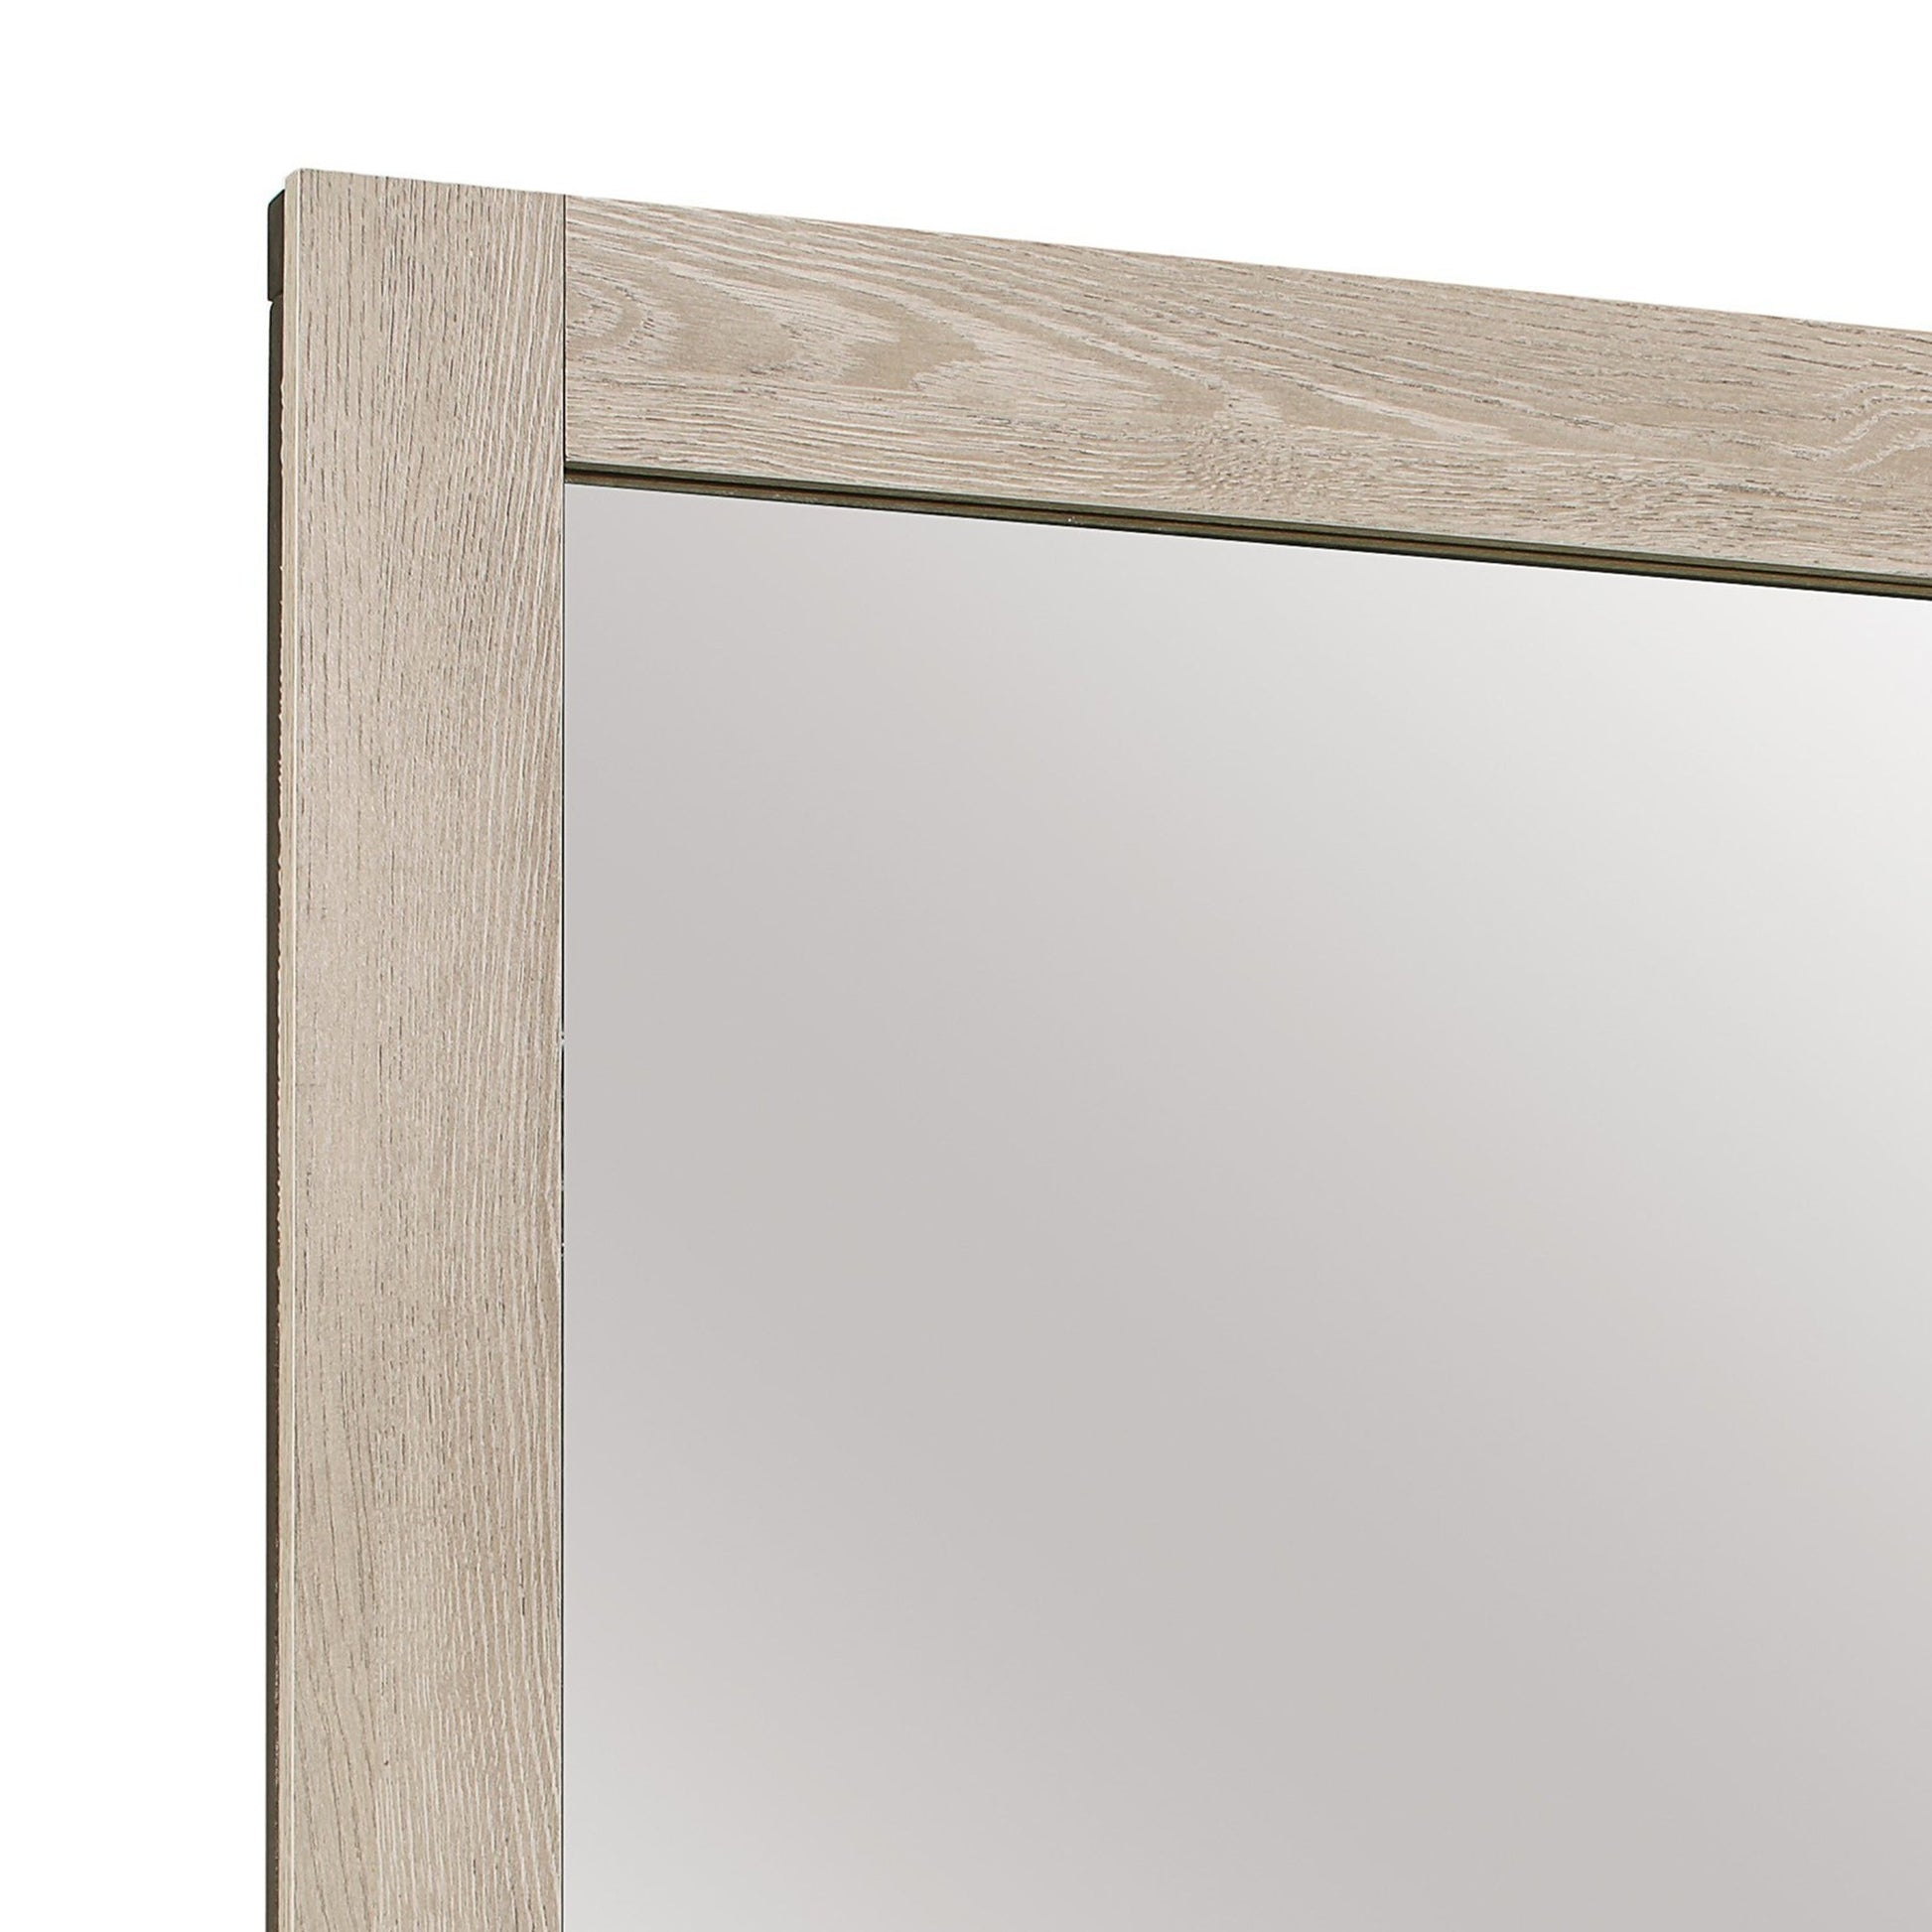 Benzara Light Brown Transitional Style Square Mirror Wooden Frame